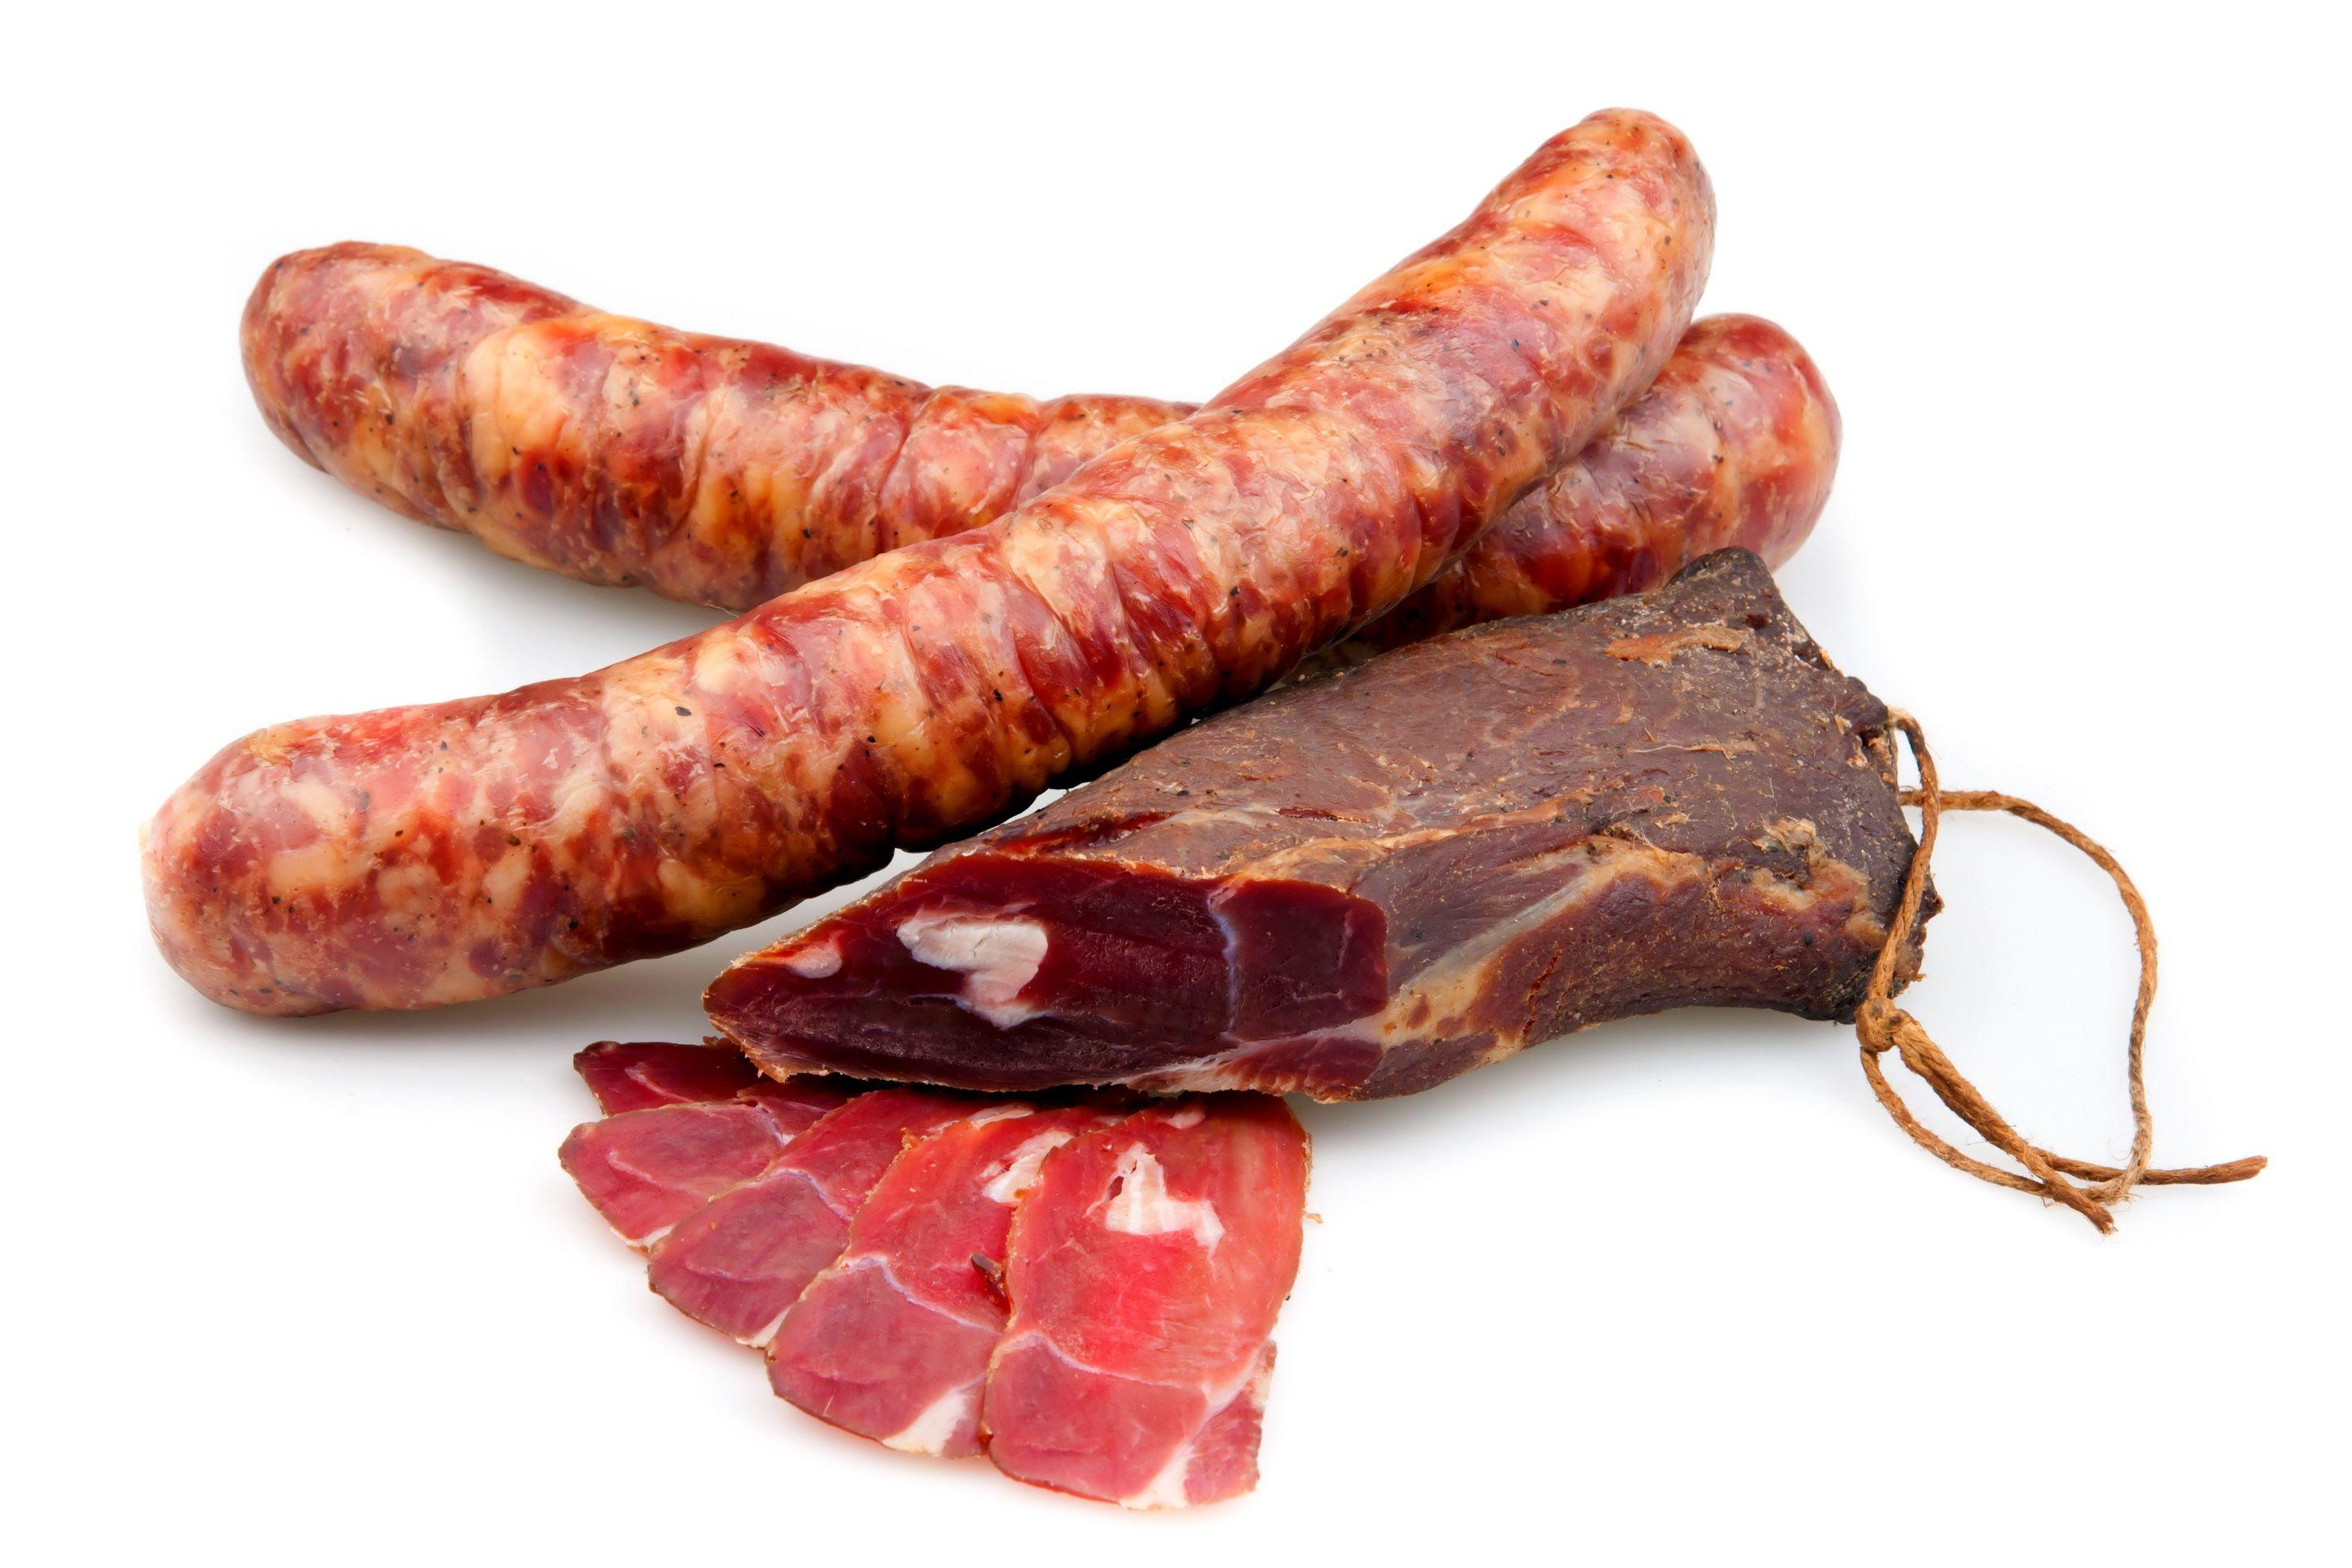 Sausage Food Meat products 2895x1930